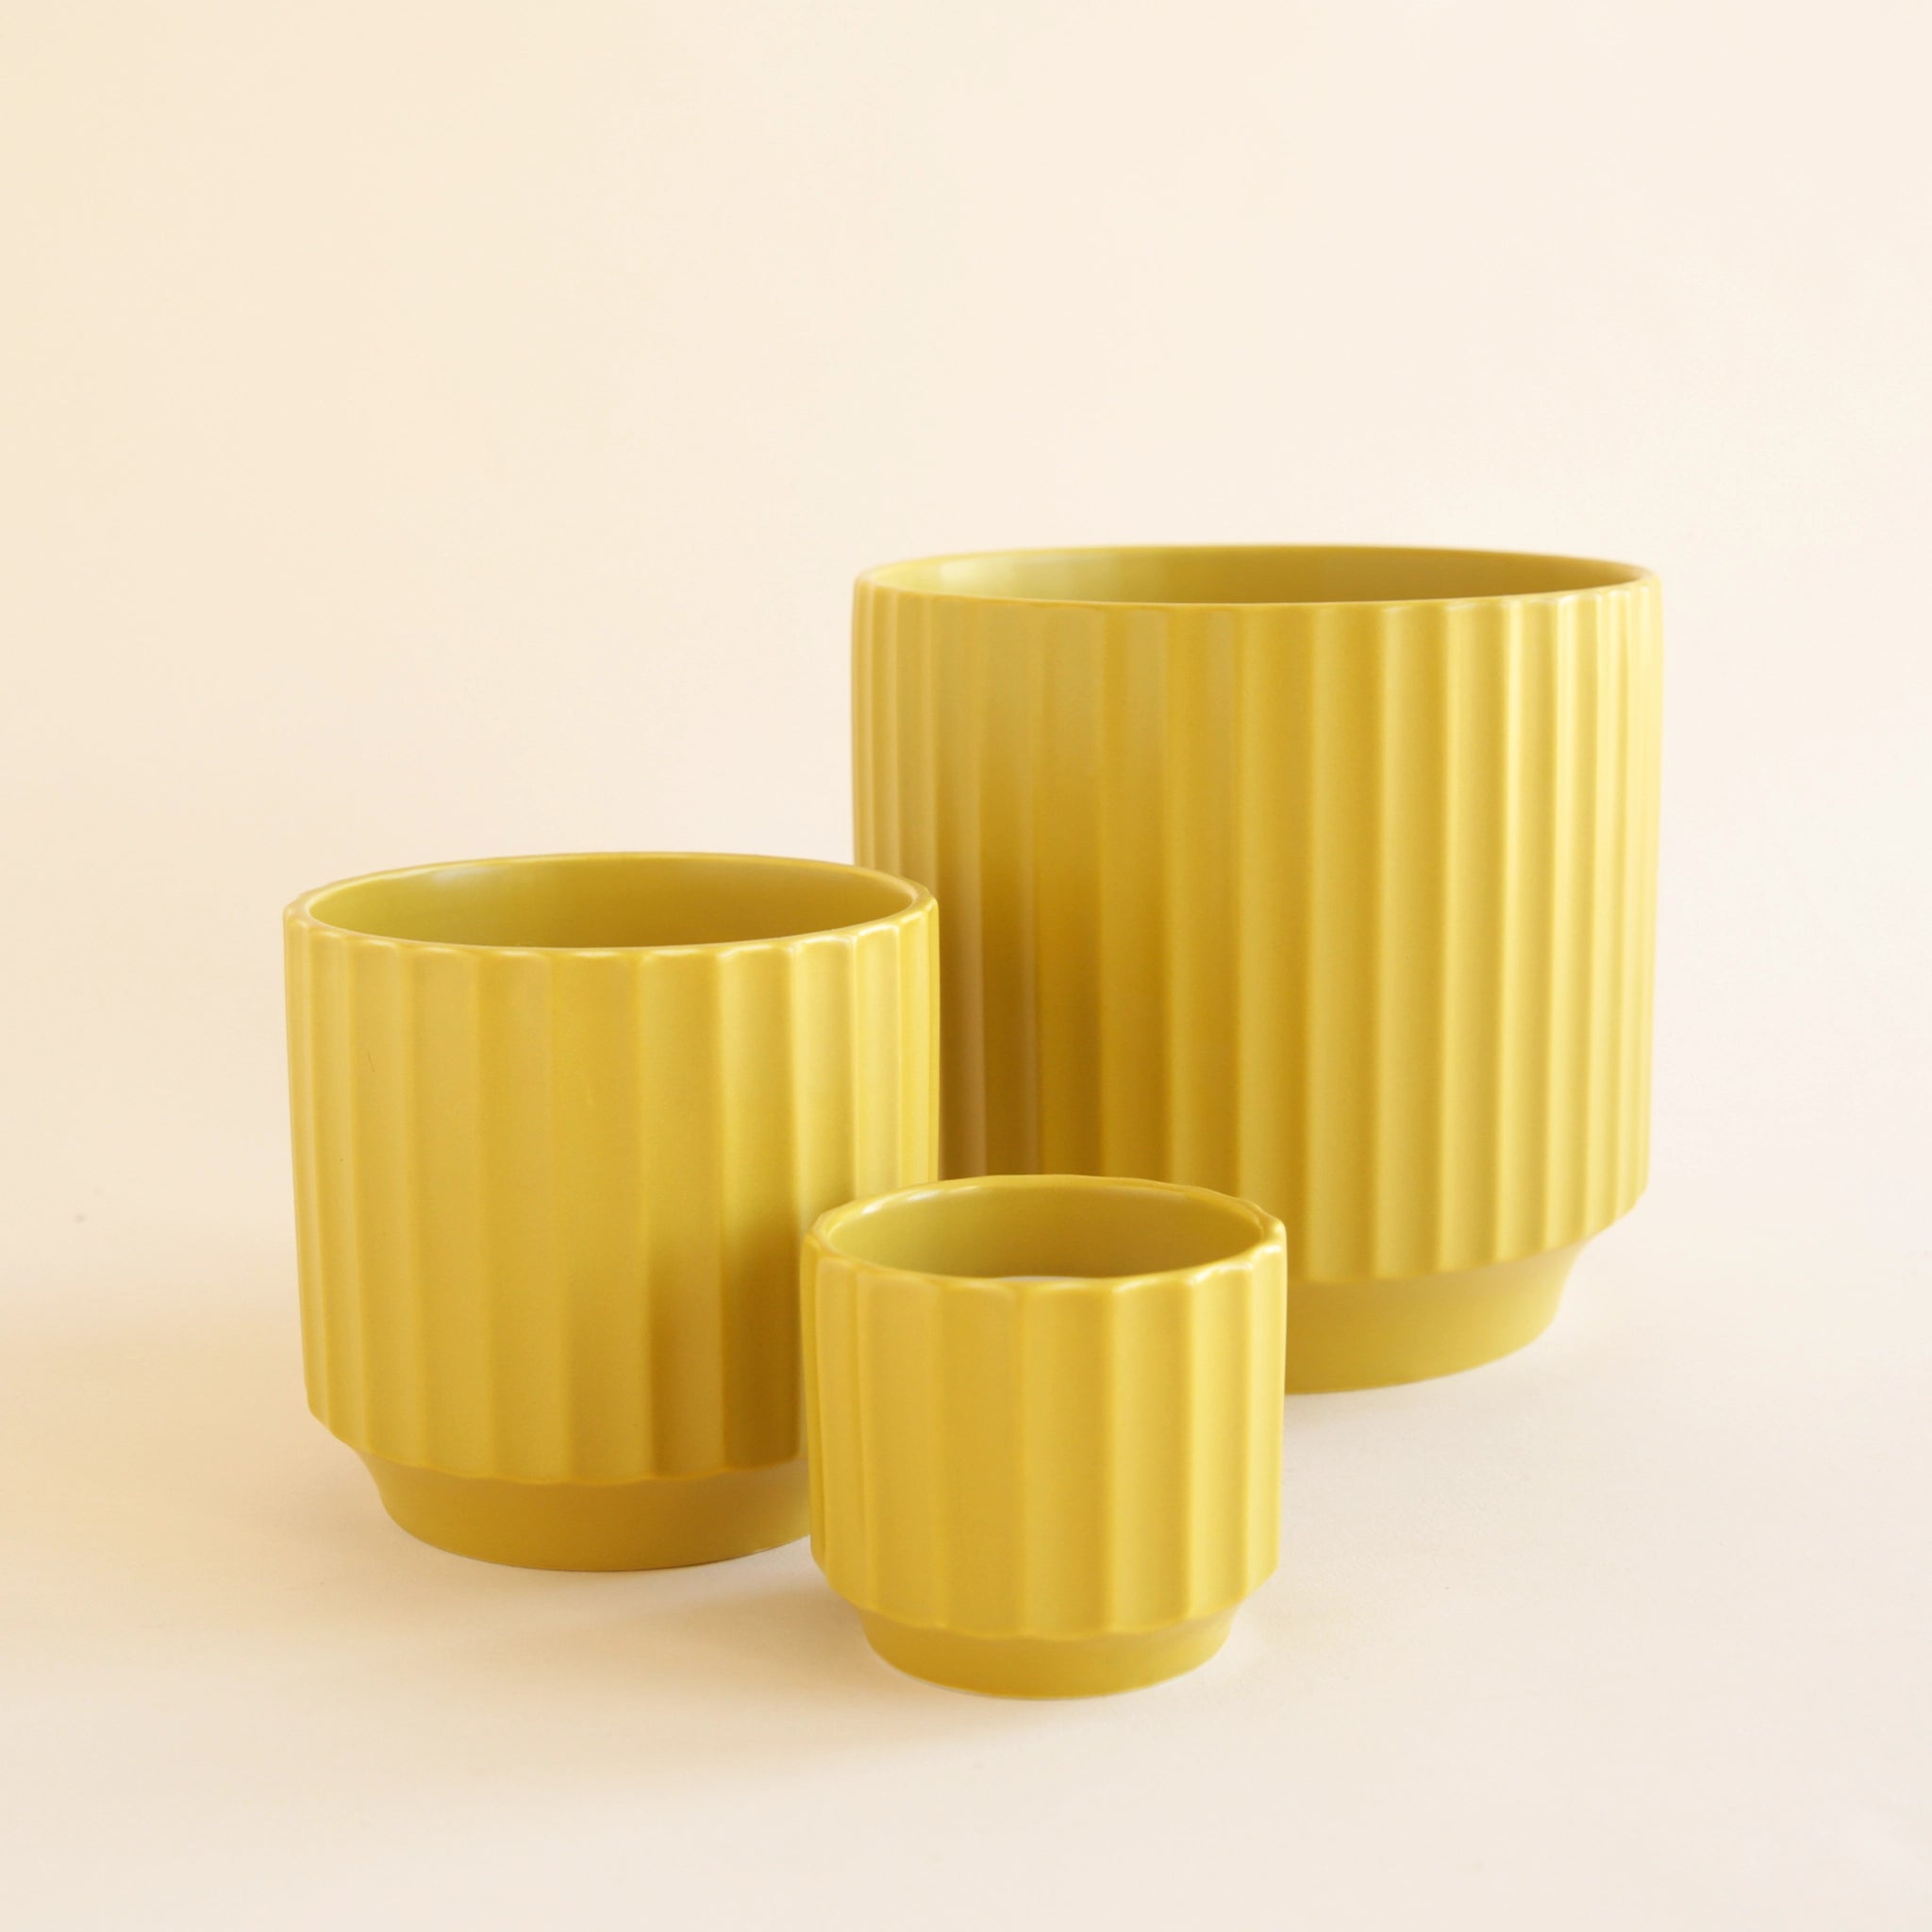 On an ivory background is three different sized charteuese ceramic pots with a ribbed texture around the sides.